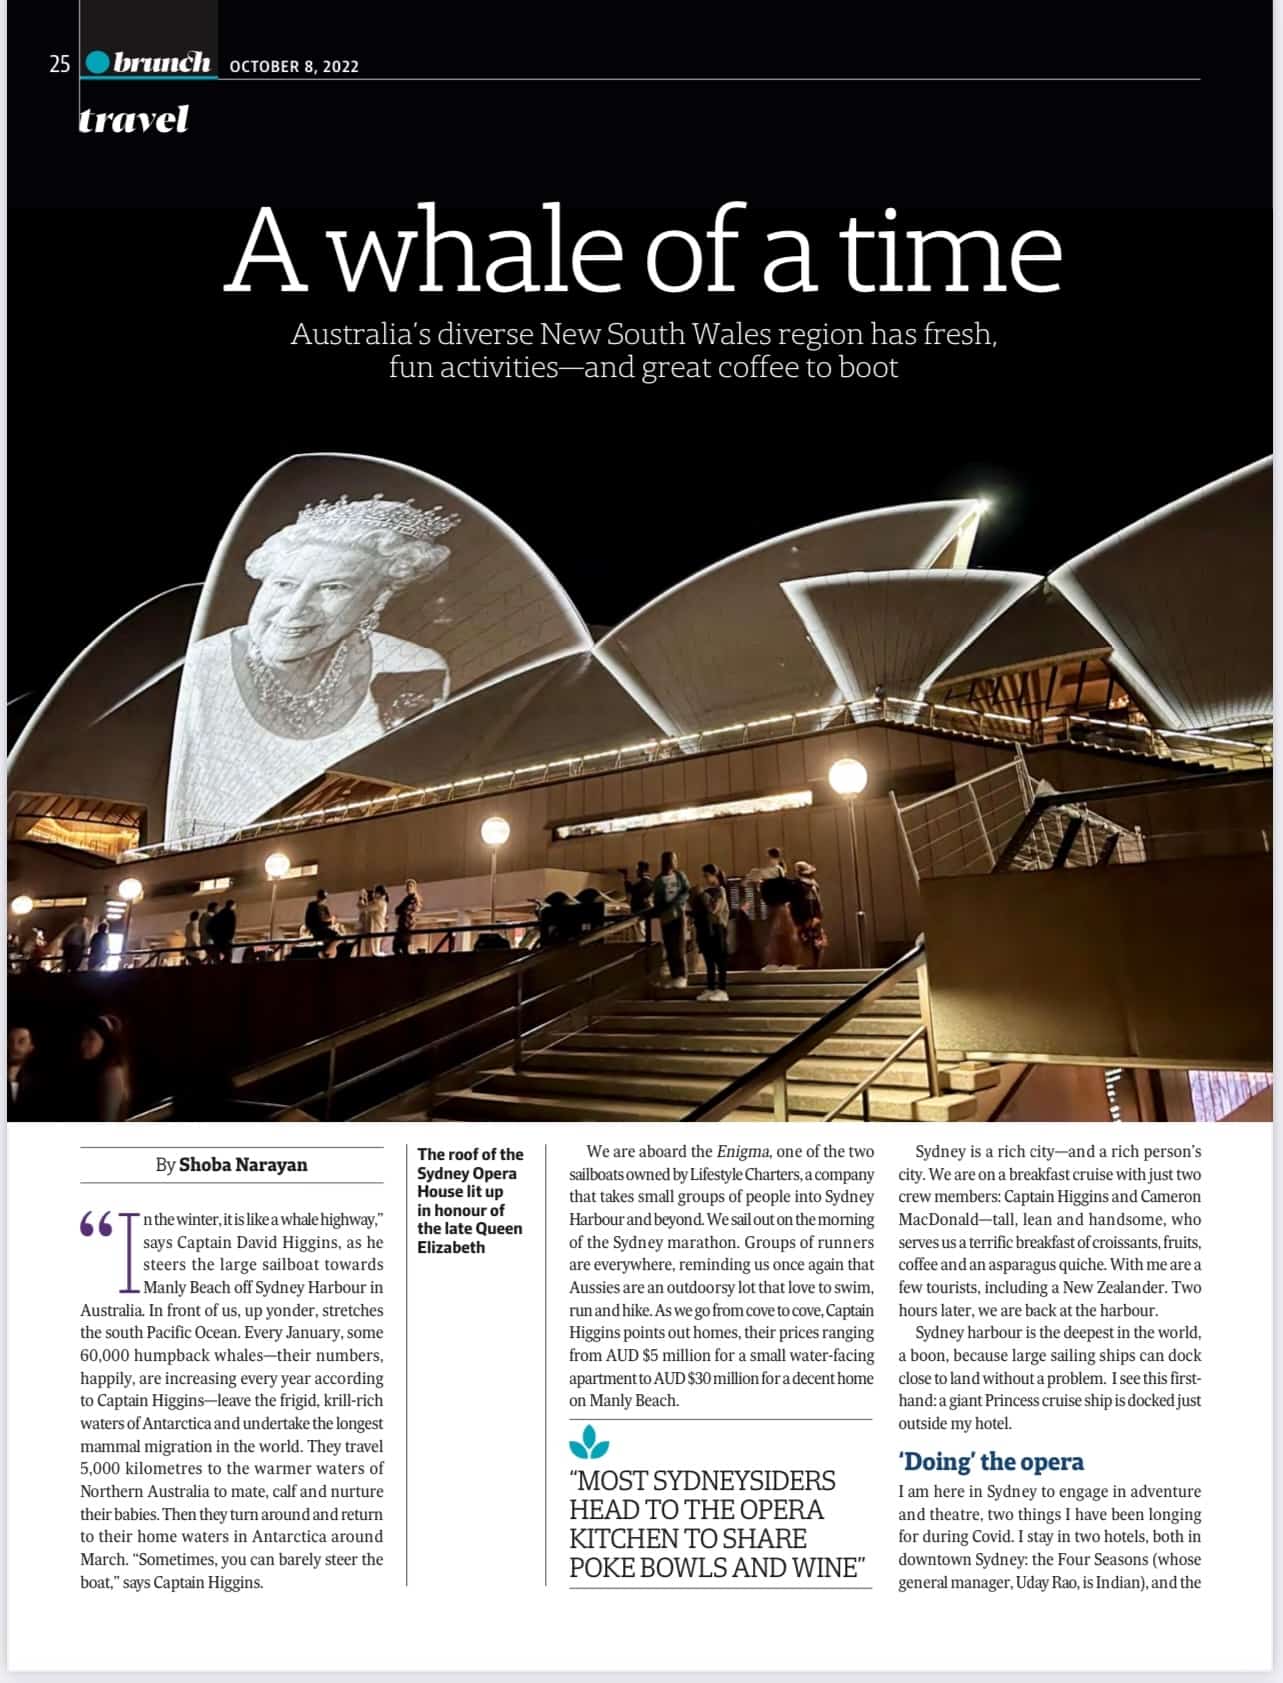 HT Brunch Australia Story: A Whale of a Time. 08 October 2022